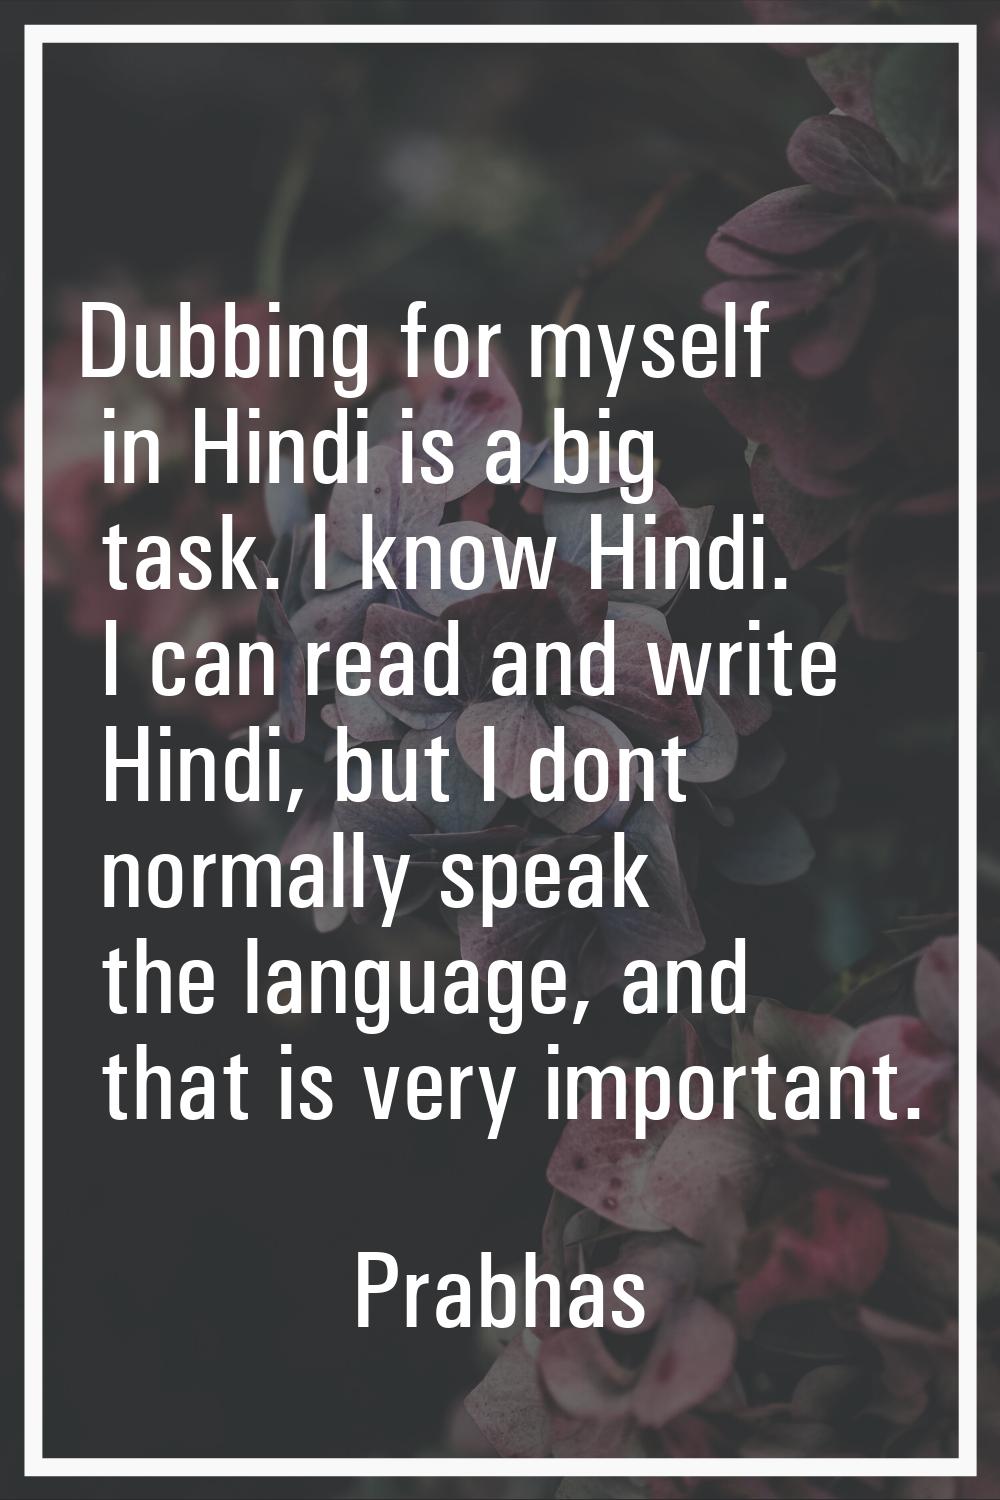 Dubbing for myself in Hindi is a big task. I know Hindi. I can read and write Hindi, but I dont nor